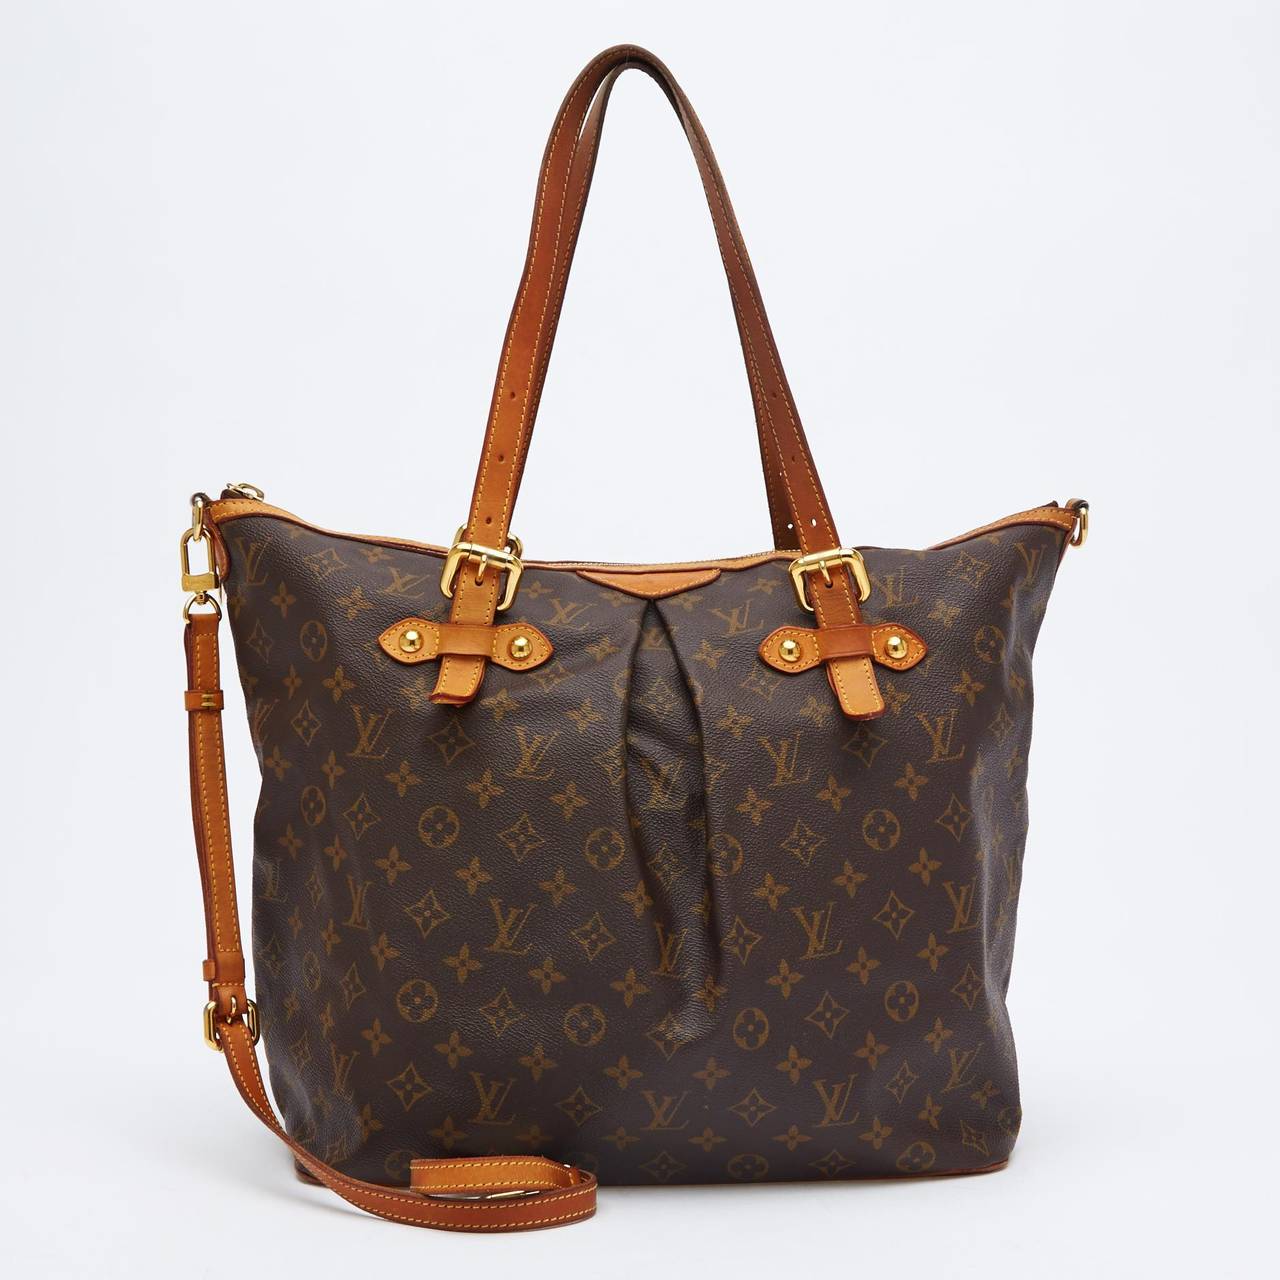 This authentic Louis Vuitton Palermo GM is beautifully crafted with Monogram canvas and leather trimming. It is accented with gold-tone hardware, and is constructed in a modern shape, making it quite spacious. It can be worn with or without its